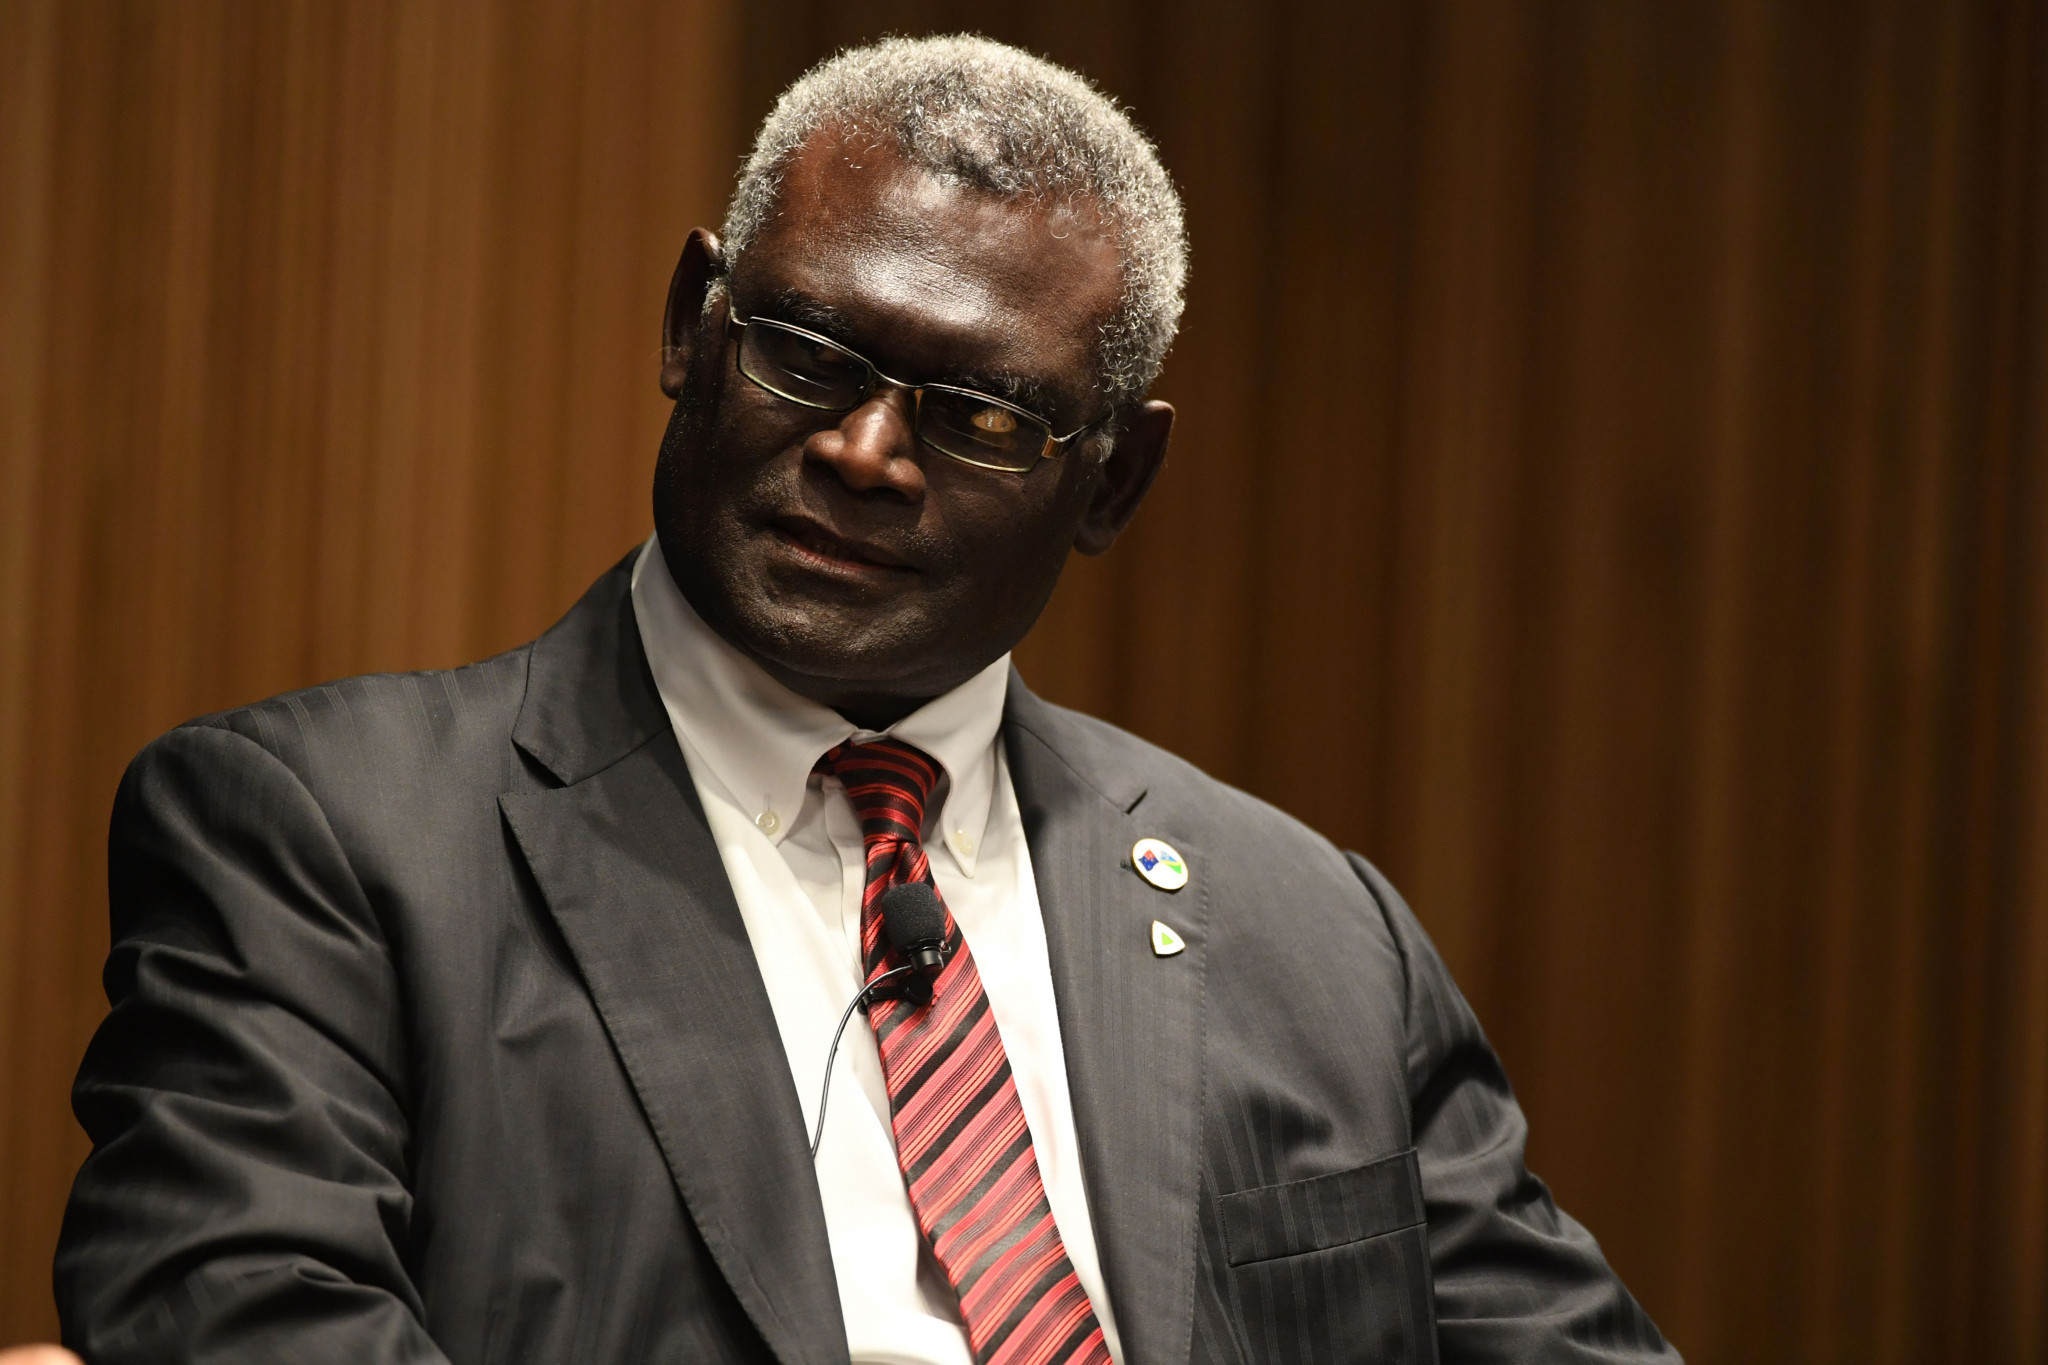 Prime Minister of the Solomon Islands, Manasseh Sogavare, updated on when projects were to be completed ©Getty Images